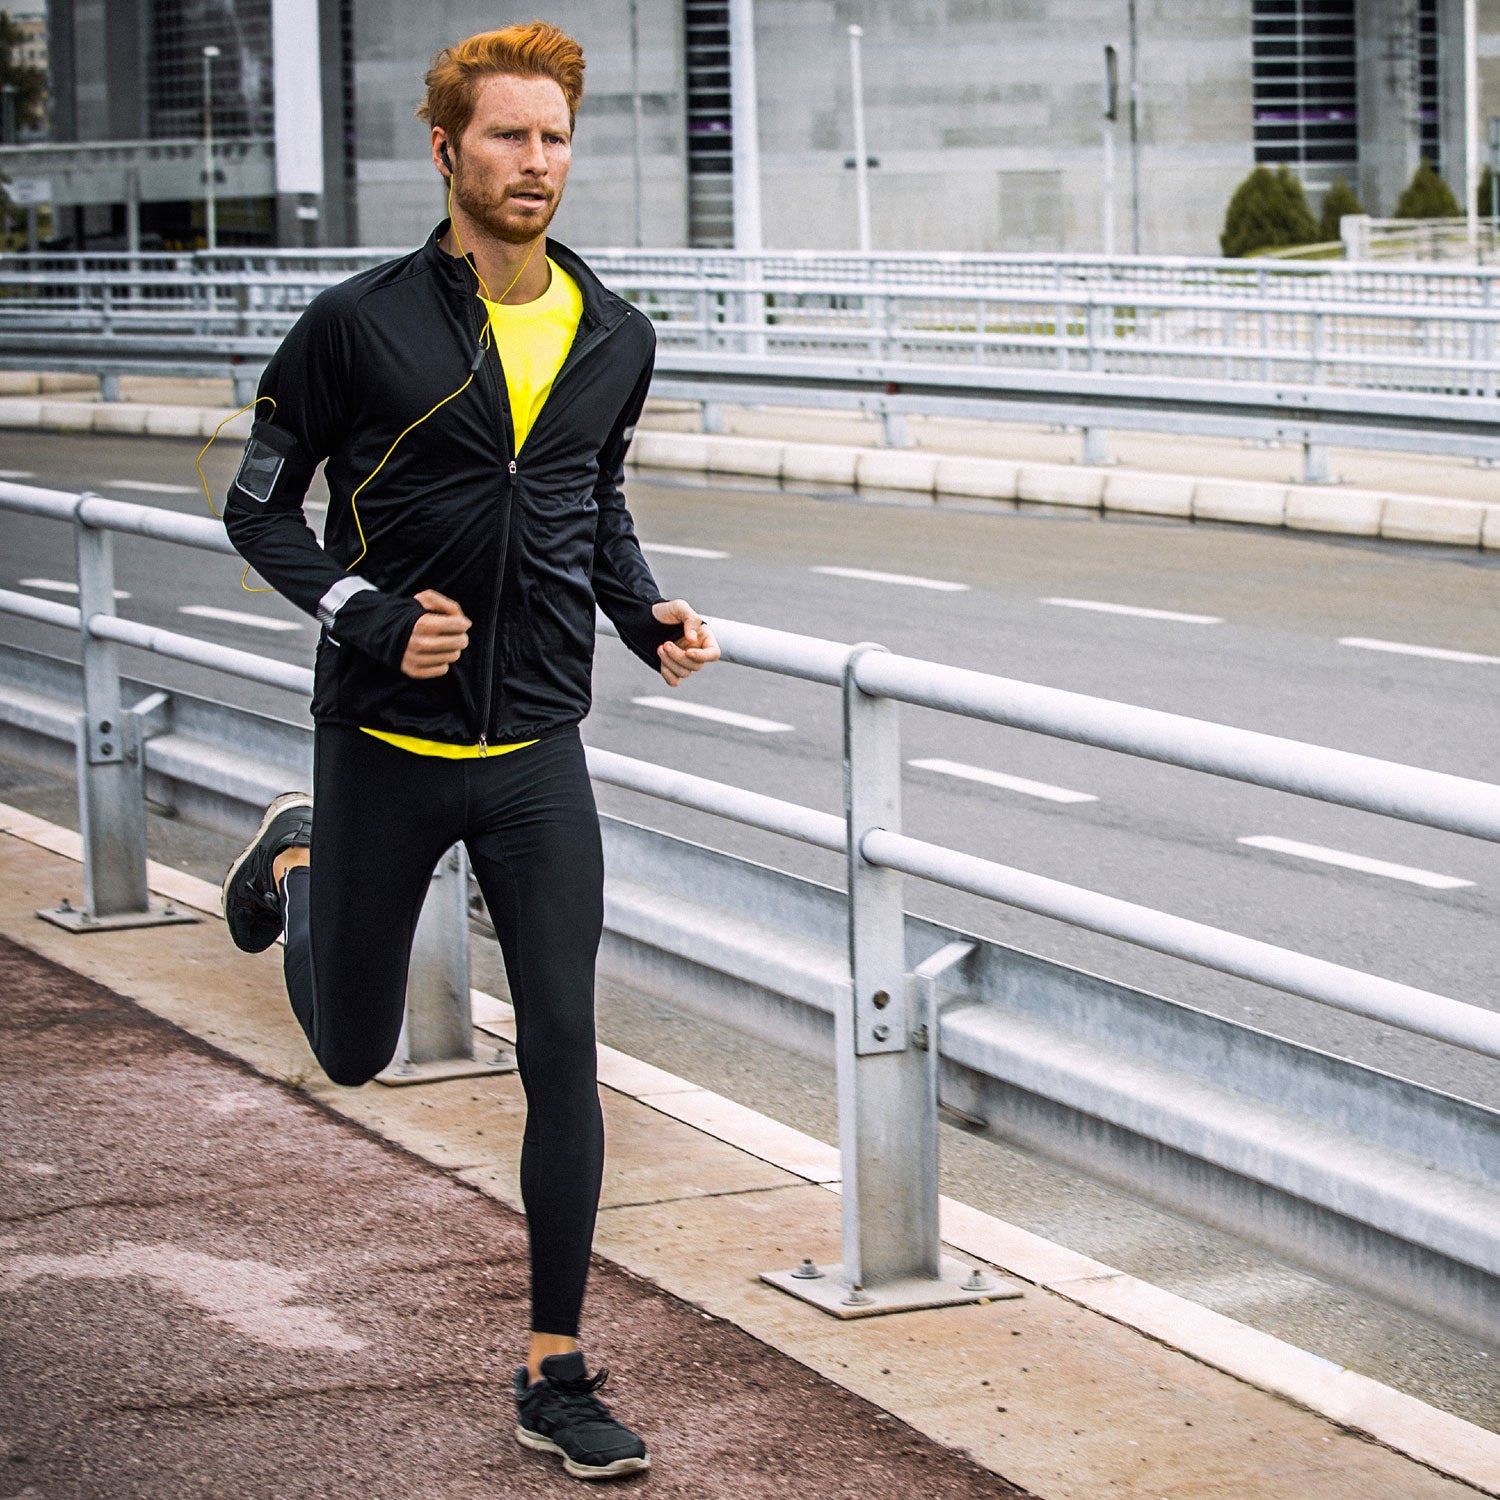 The Best Running Tops You Can Buy on